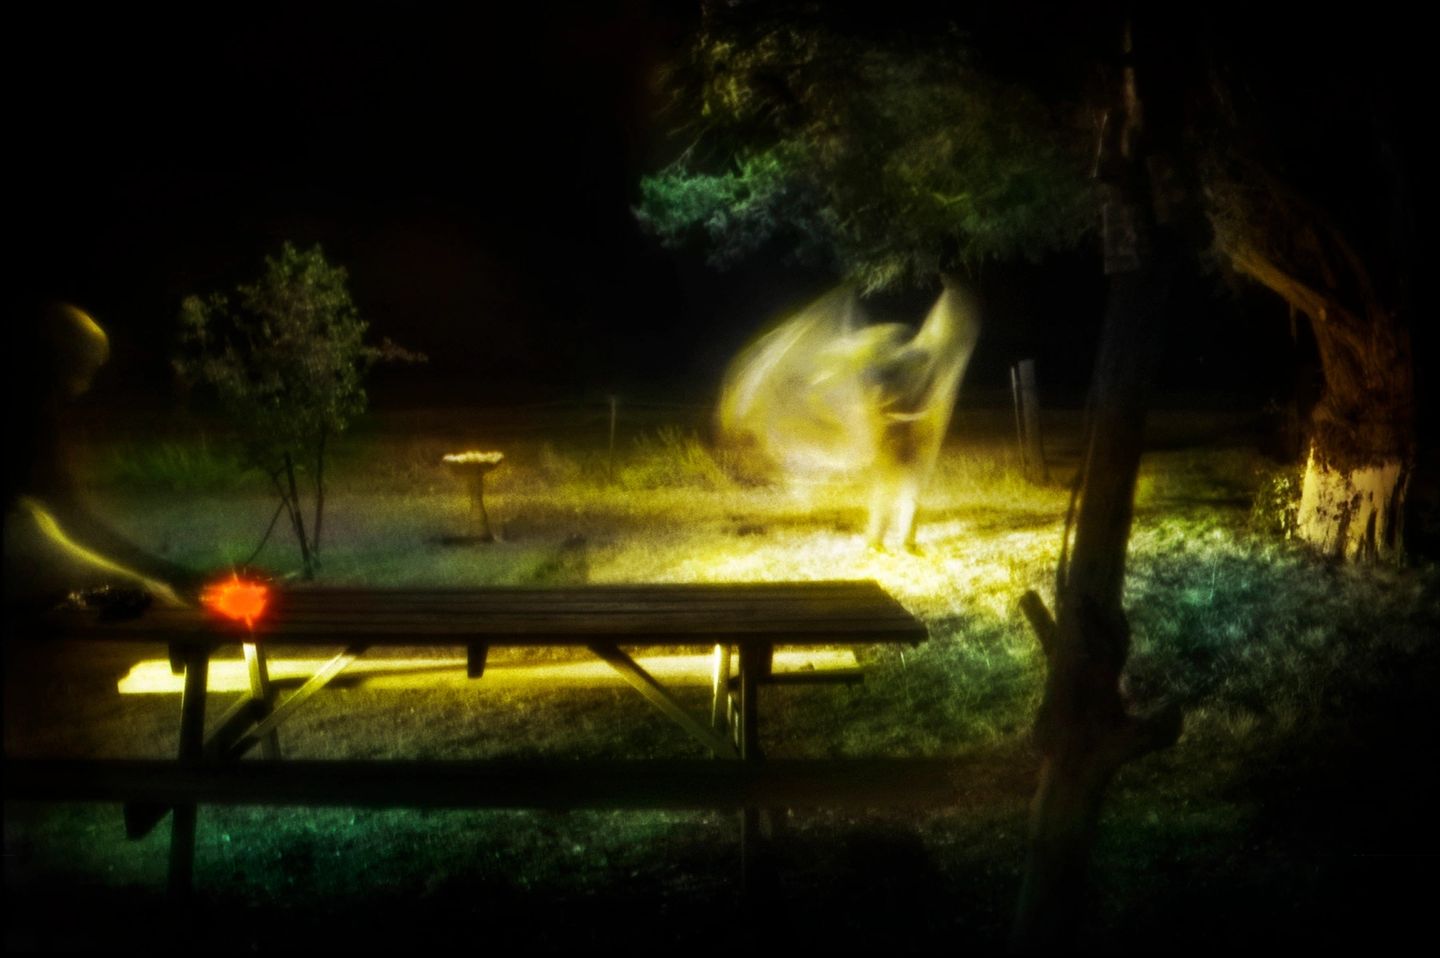 A blurry image of a person standing on a bench